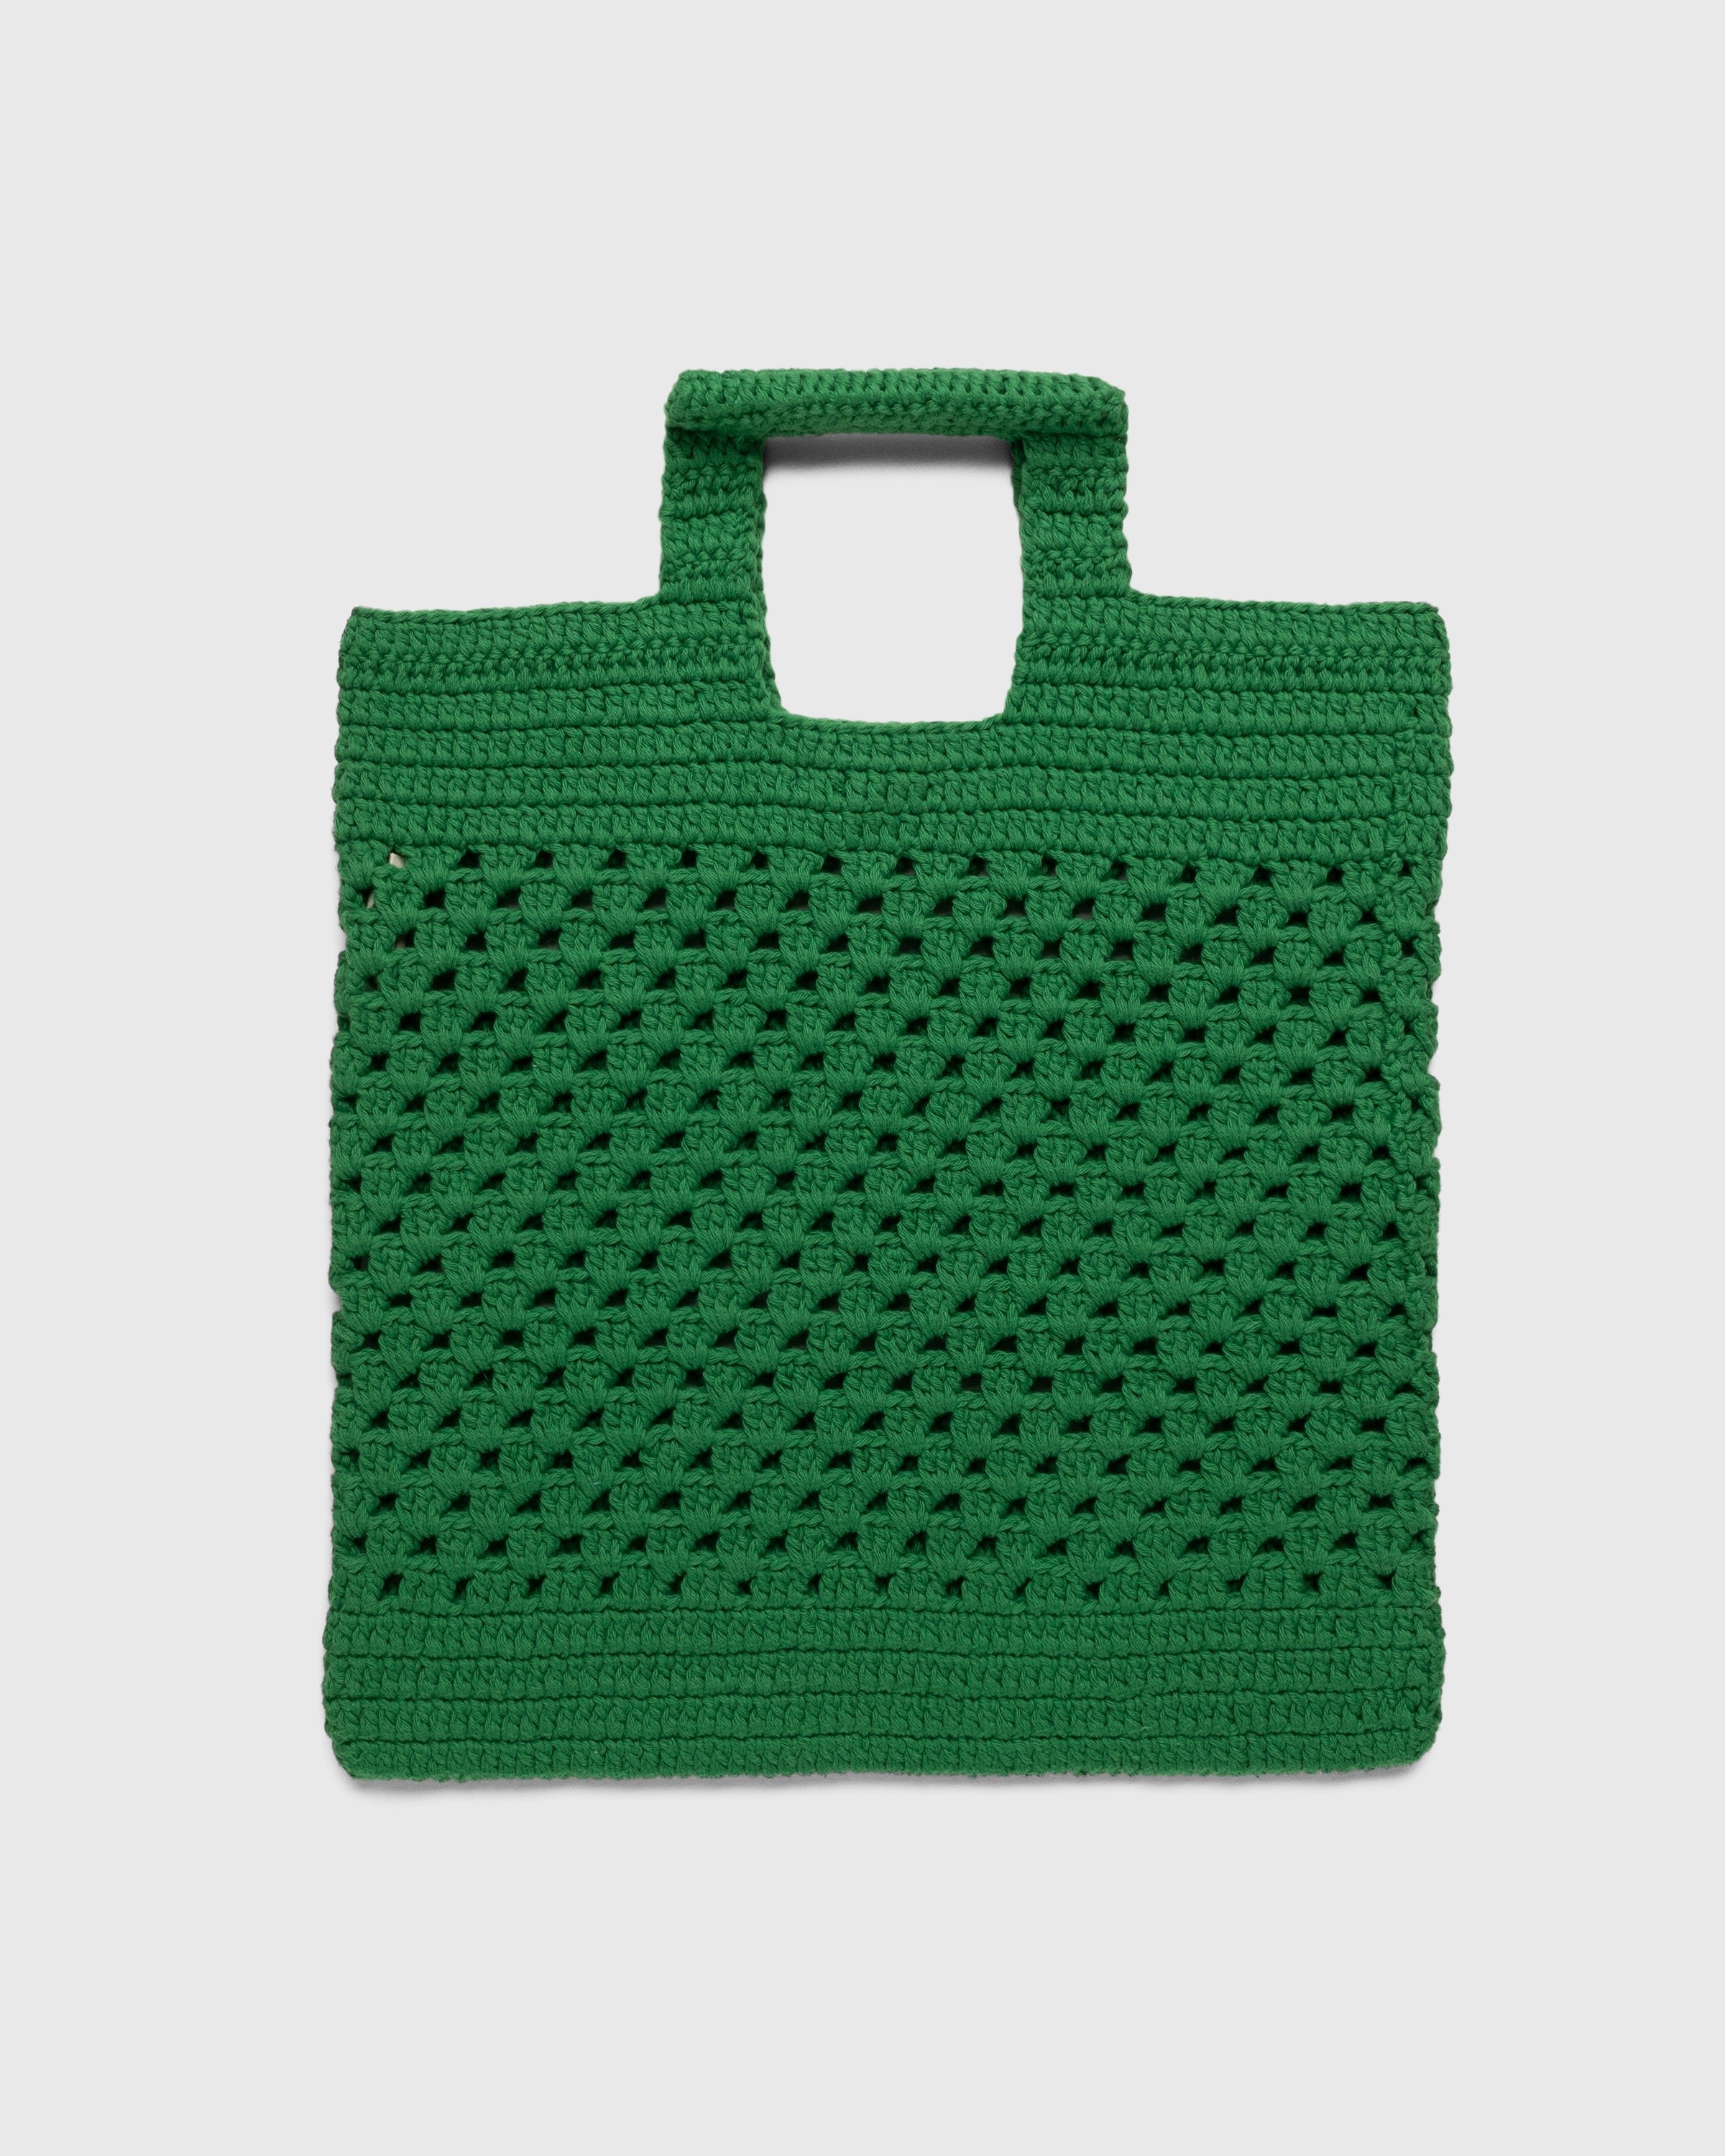 Bode – Crochet Tote Green - Tote Bags - Green - Image 2